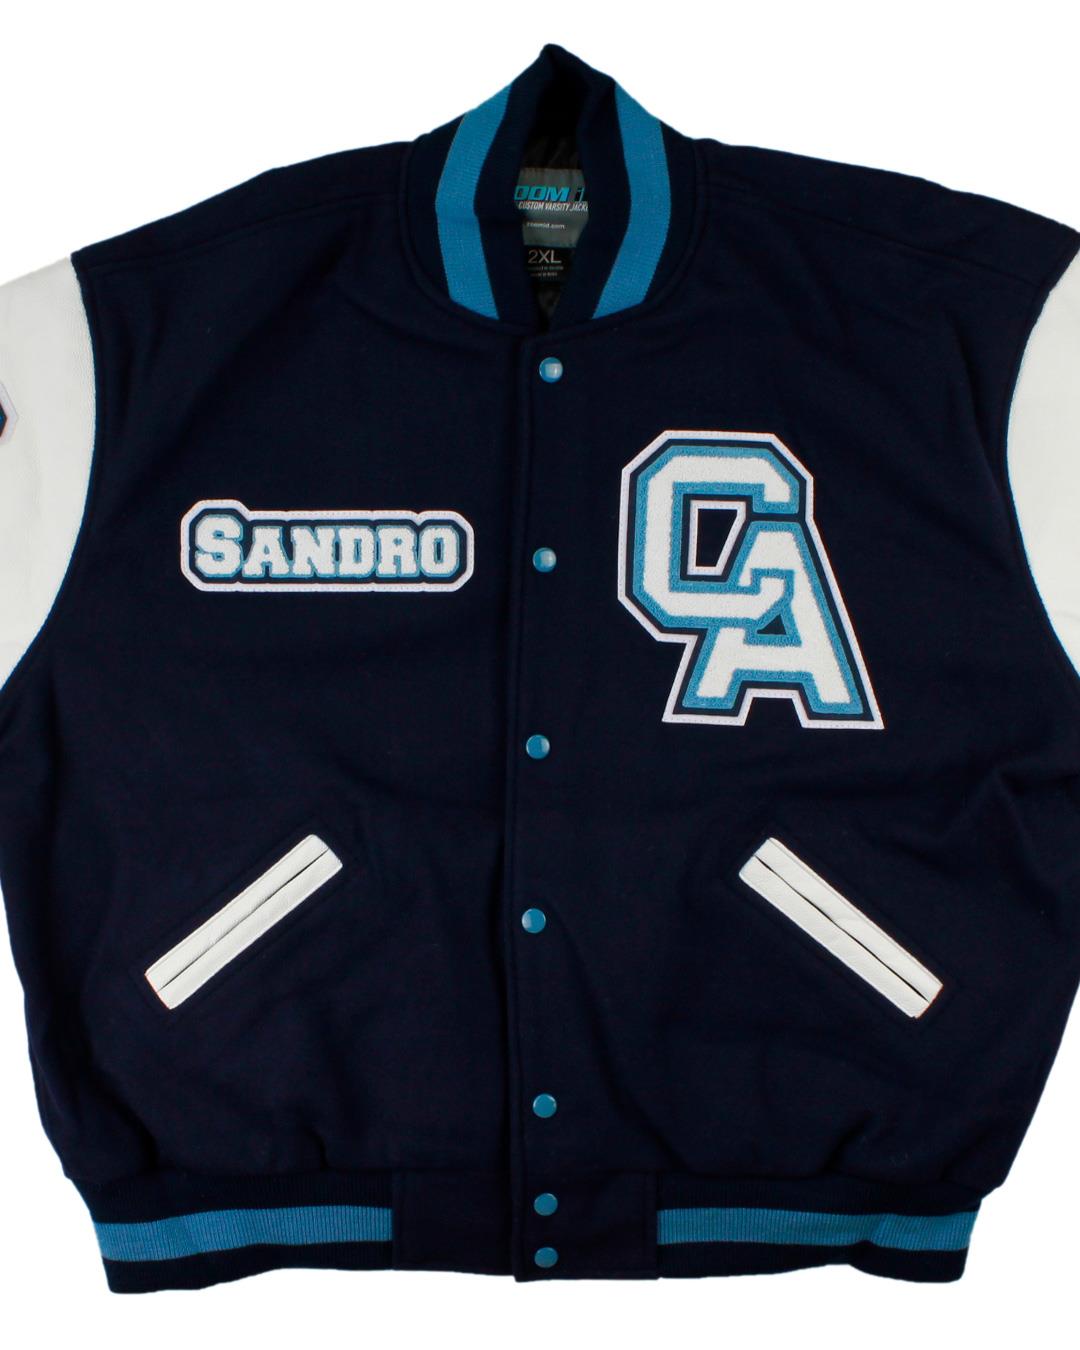 Coral Academy of Science Falcons Letterman Jacket, Reno NV - Front